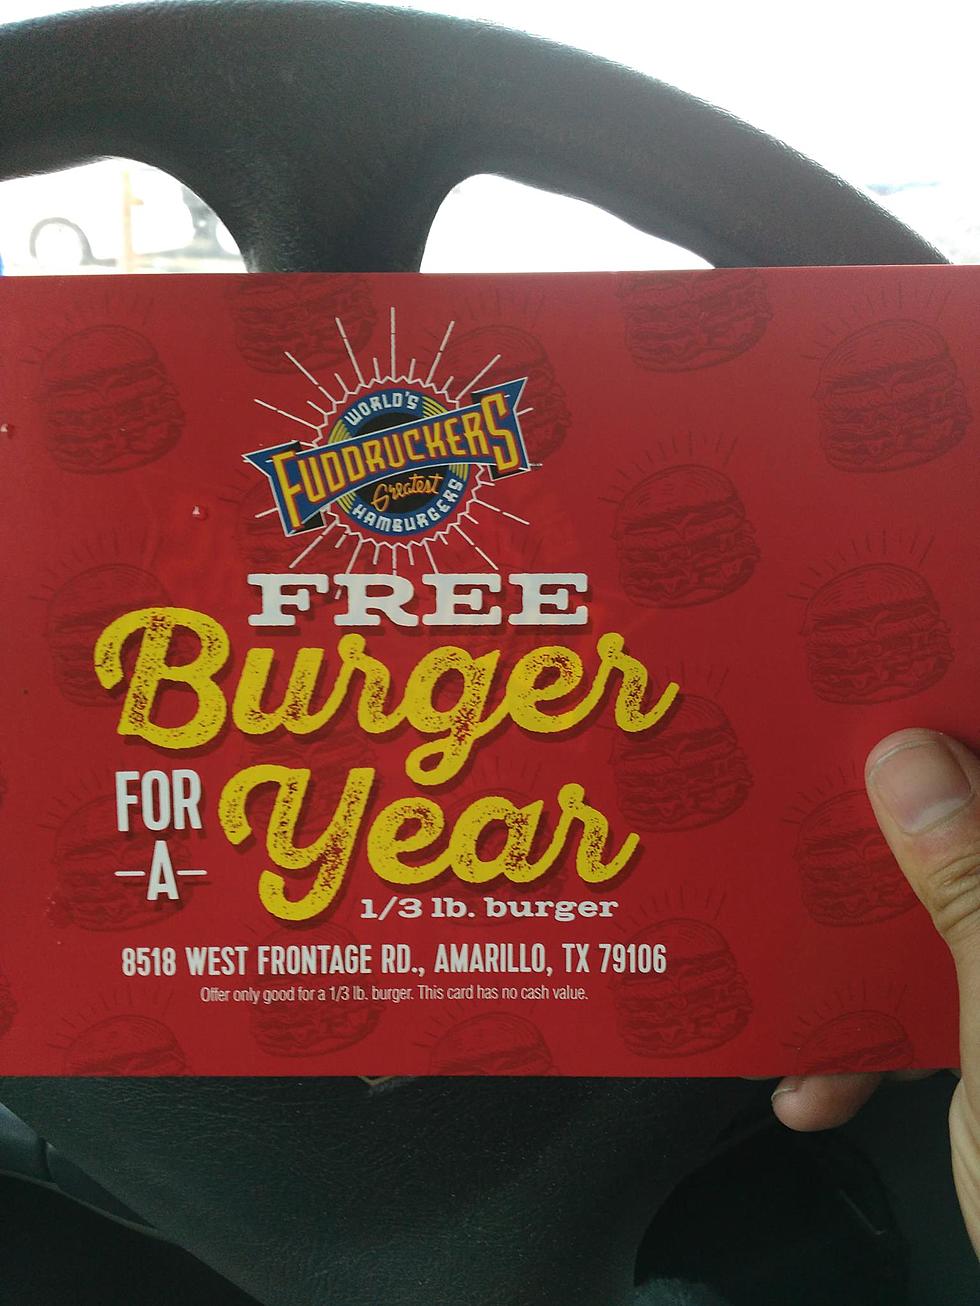 100 People From Amarillo Won Free Burgers For A Year At the Fuddruckers Grand Opening